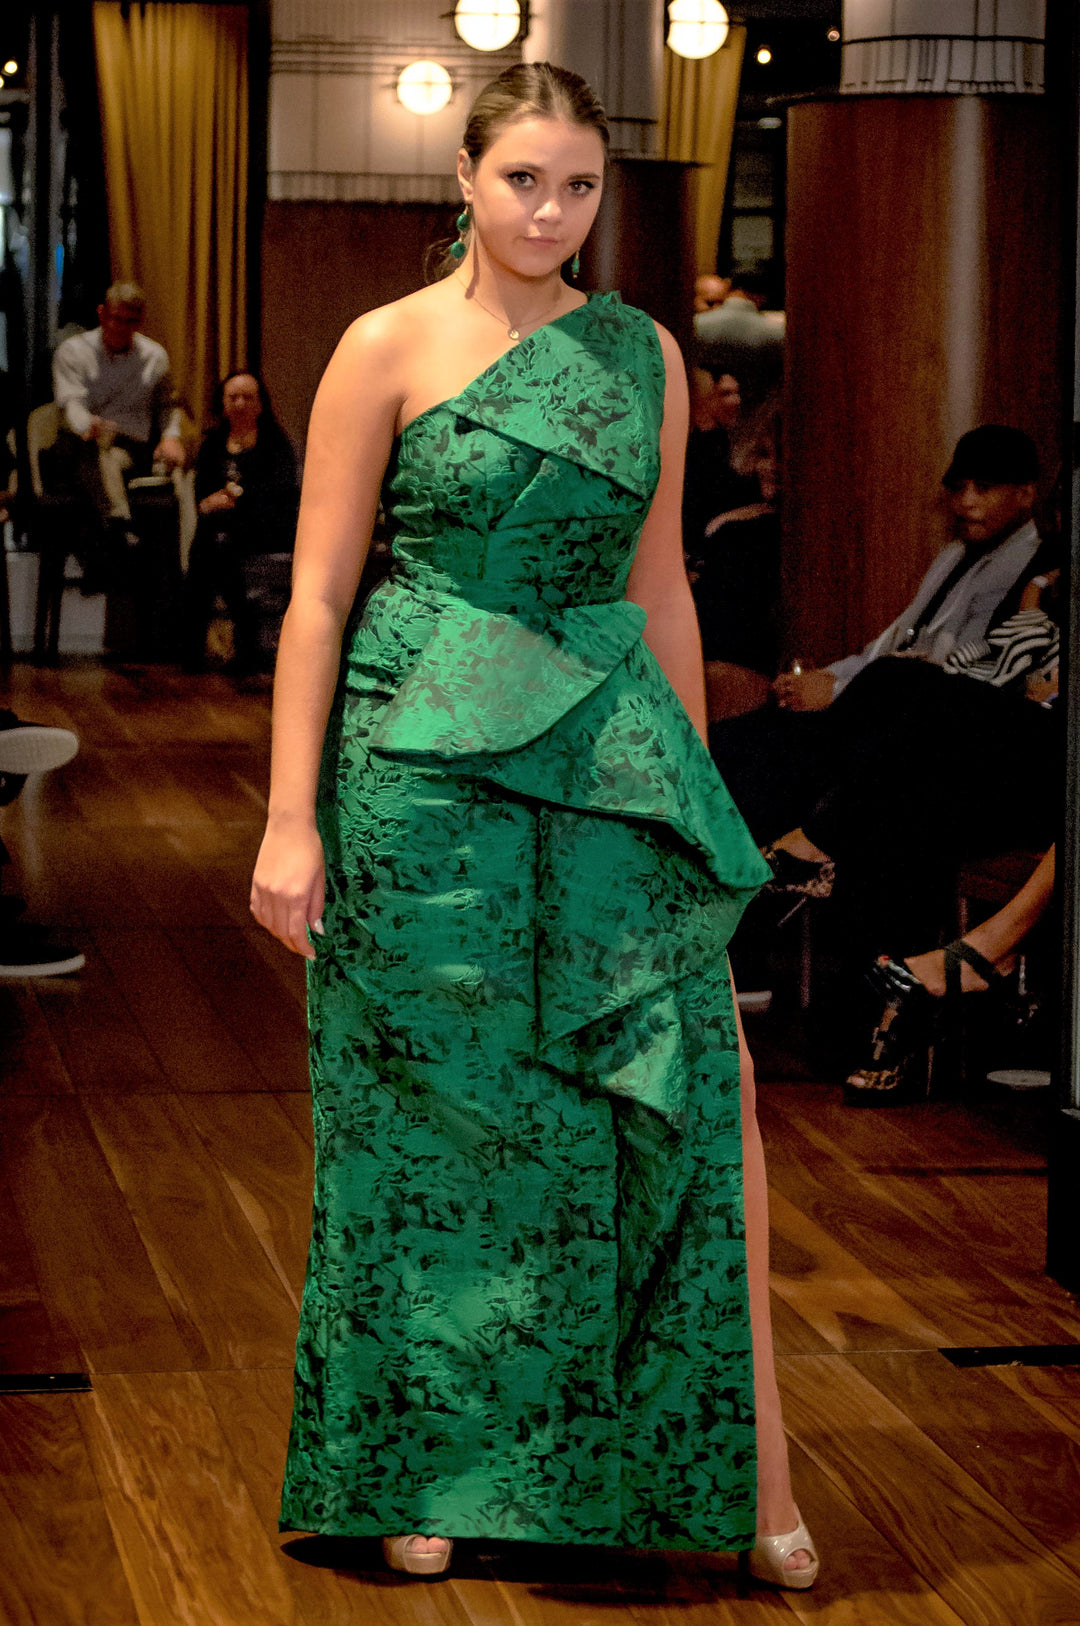 Green Jacquard Couture Dress One Shoulder Asymmetrical Flattering Mother of The Bride Evening party Gown by Alesia C. Chicago Fashion Designer Custom-made Dresses